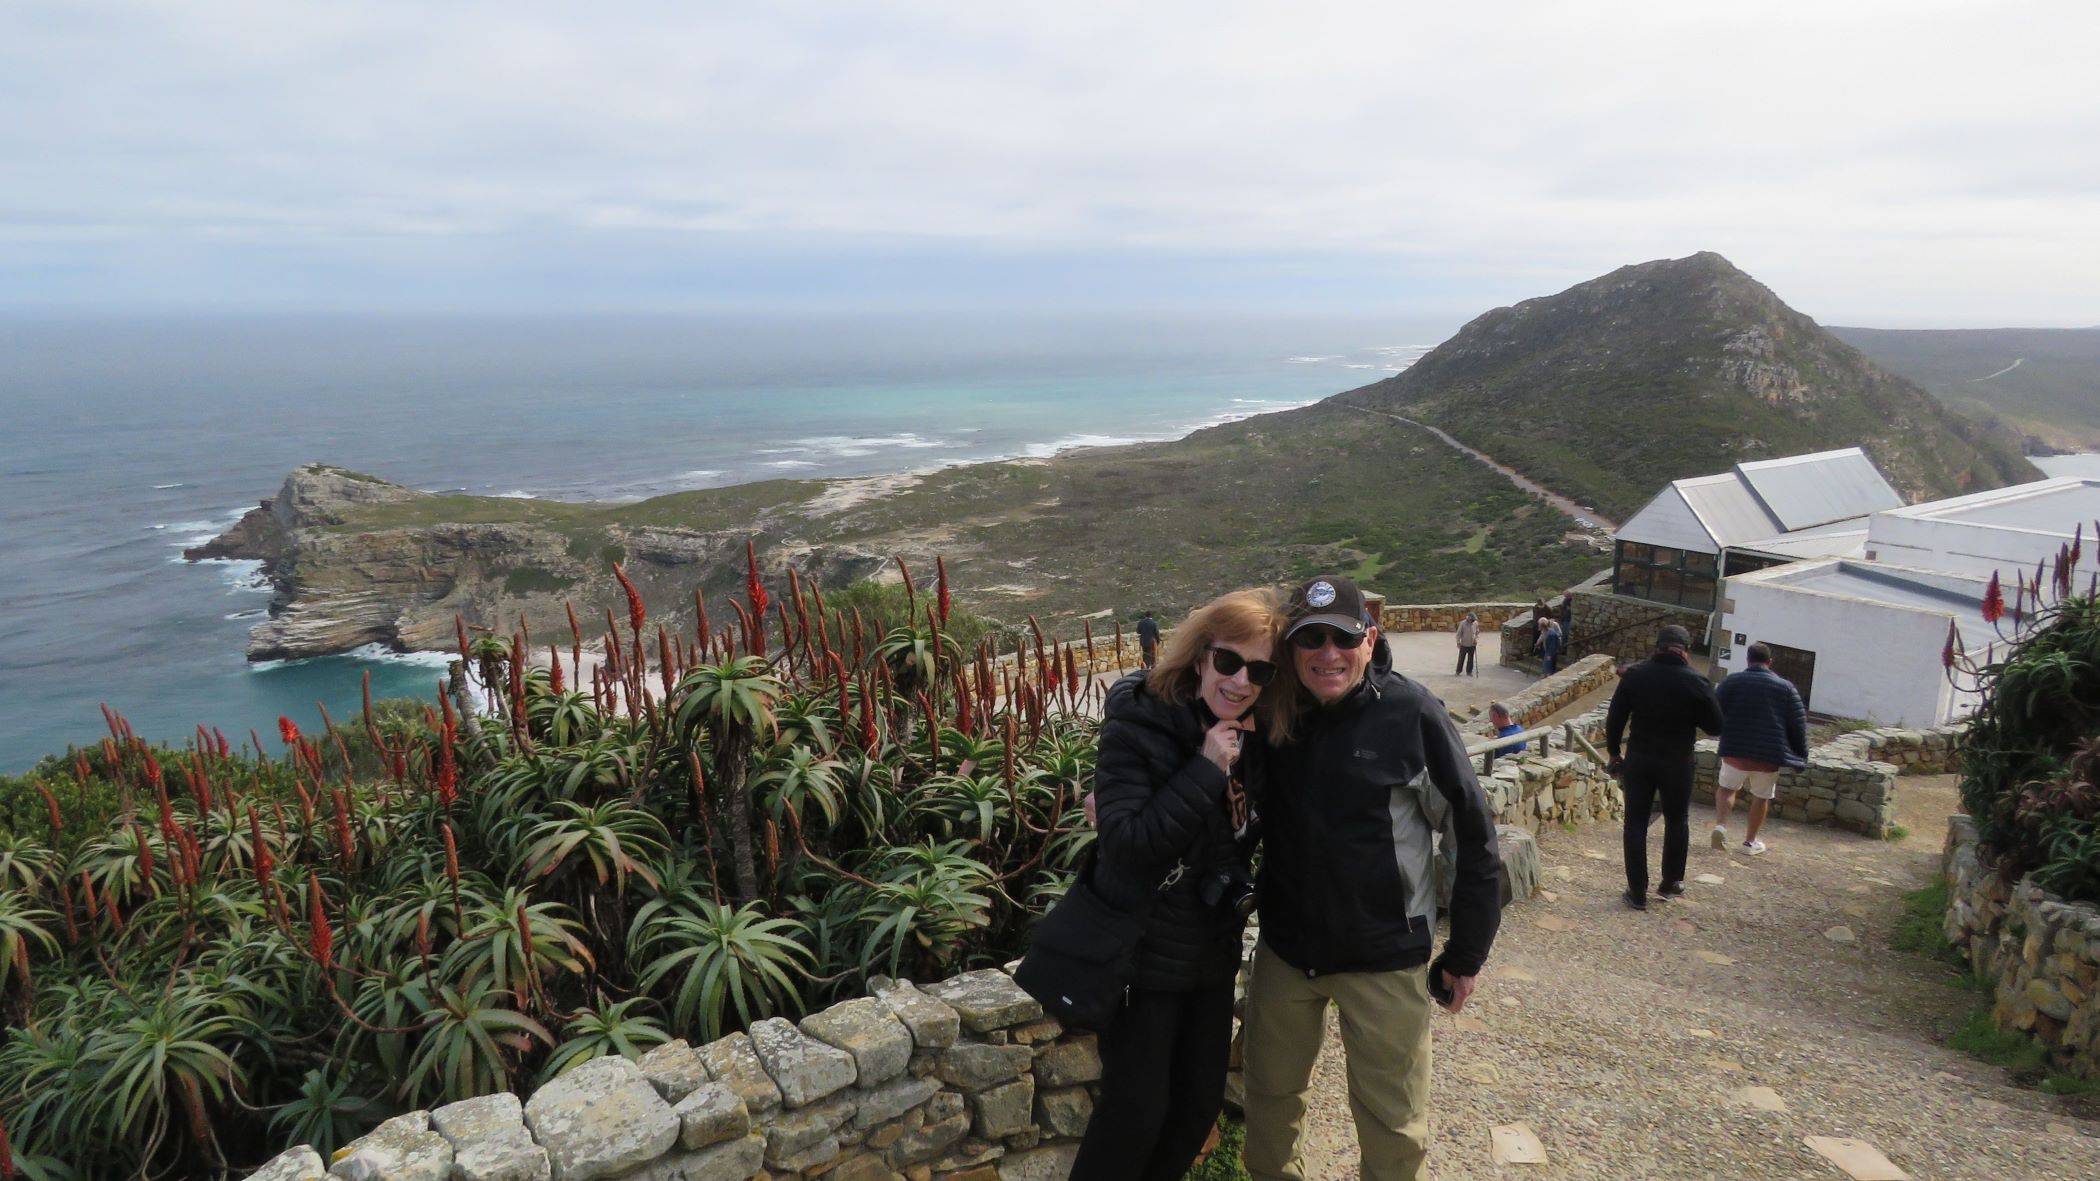 Vicinity of Cape of Good Hope, South Africa